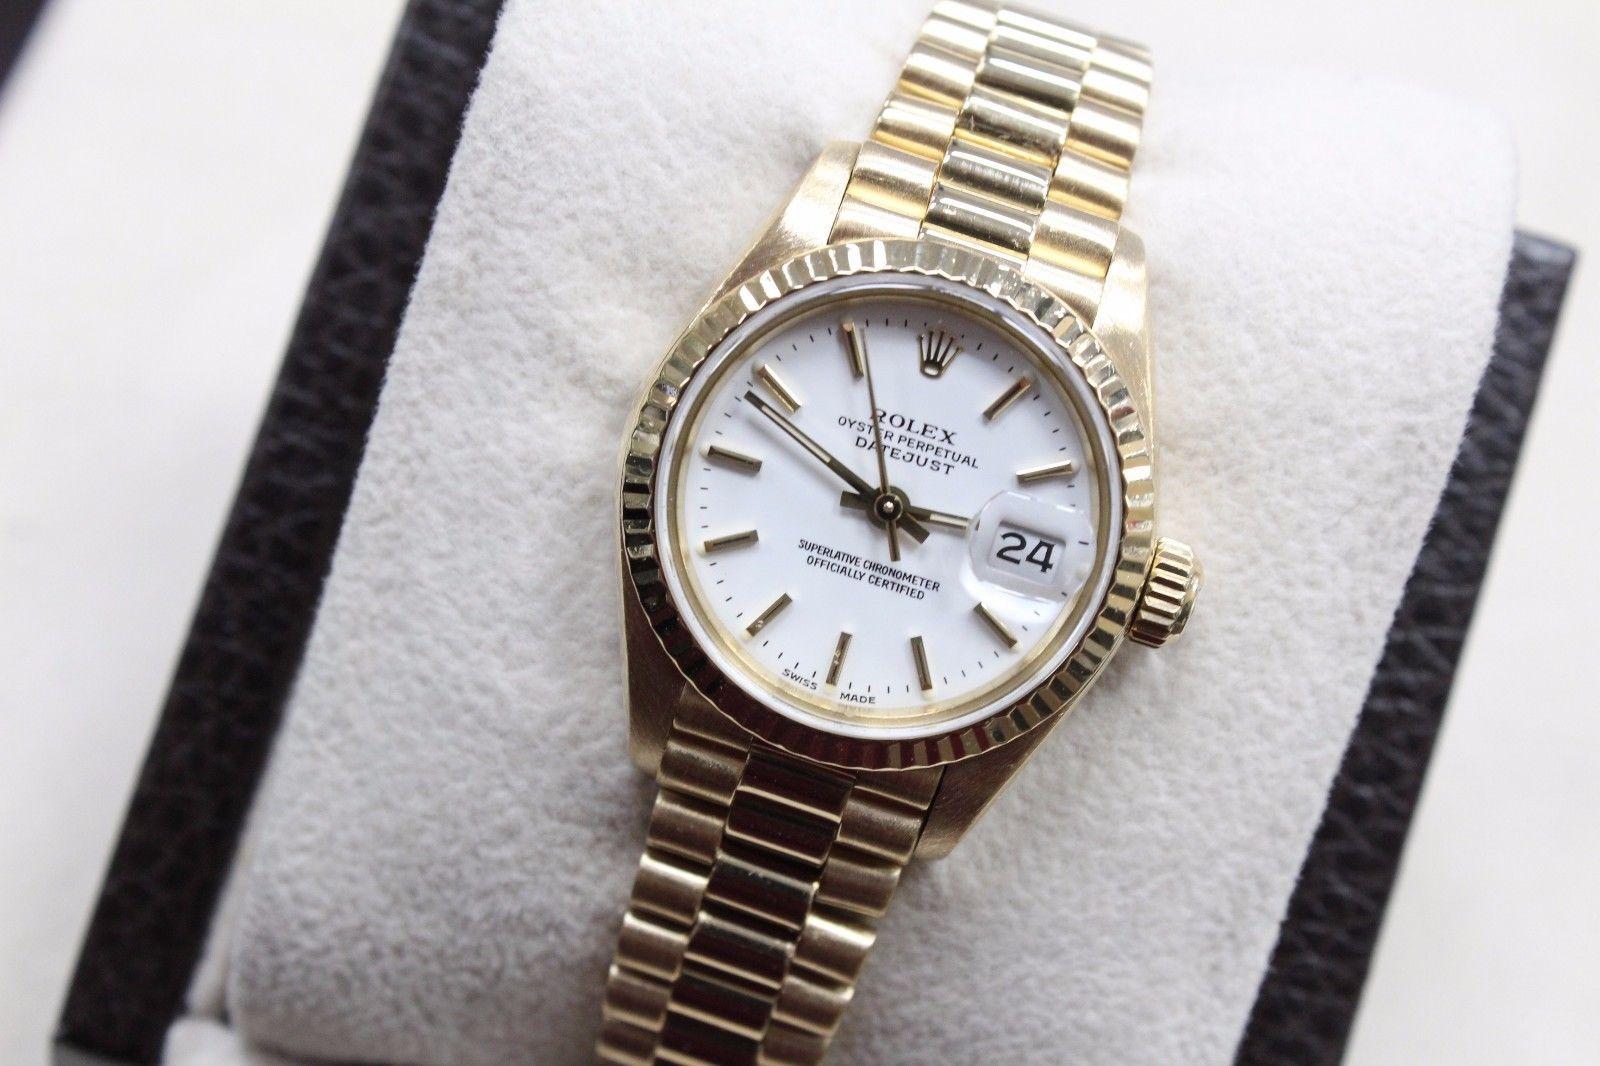 Style Number: 69178

Serial: 9502***

Model: Ladies President Datejust 

Case: 18K Yellow Gold

Band: 18K Yellow Gold

Bezel: 18K Yellow Gold

Dial: White

Face: Sapphire Crystal 

Case Size: 26mm

Includes: 

-Elegant Watch Box 

-Certified